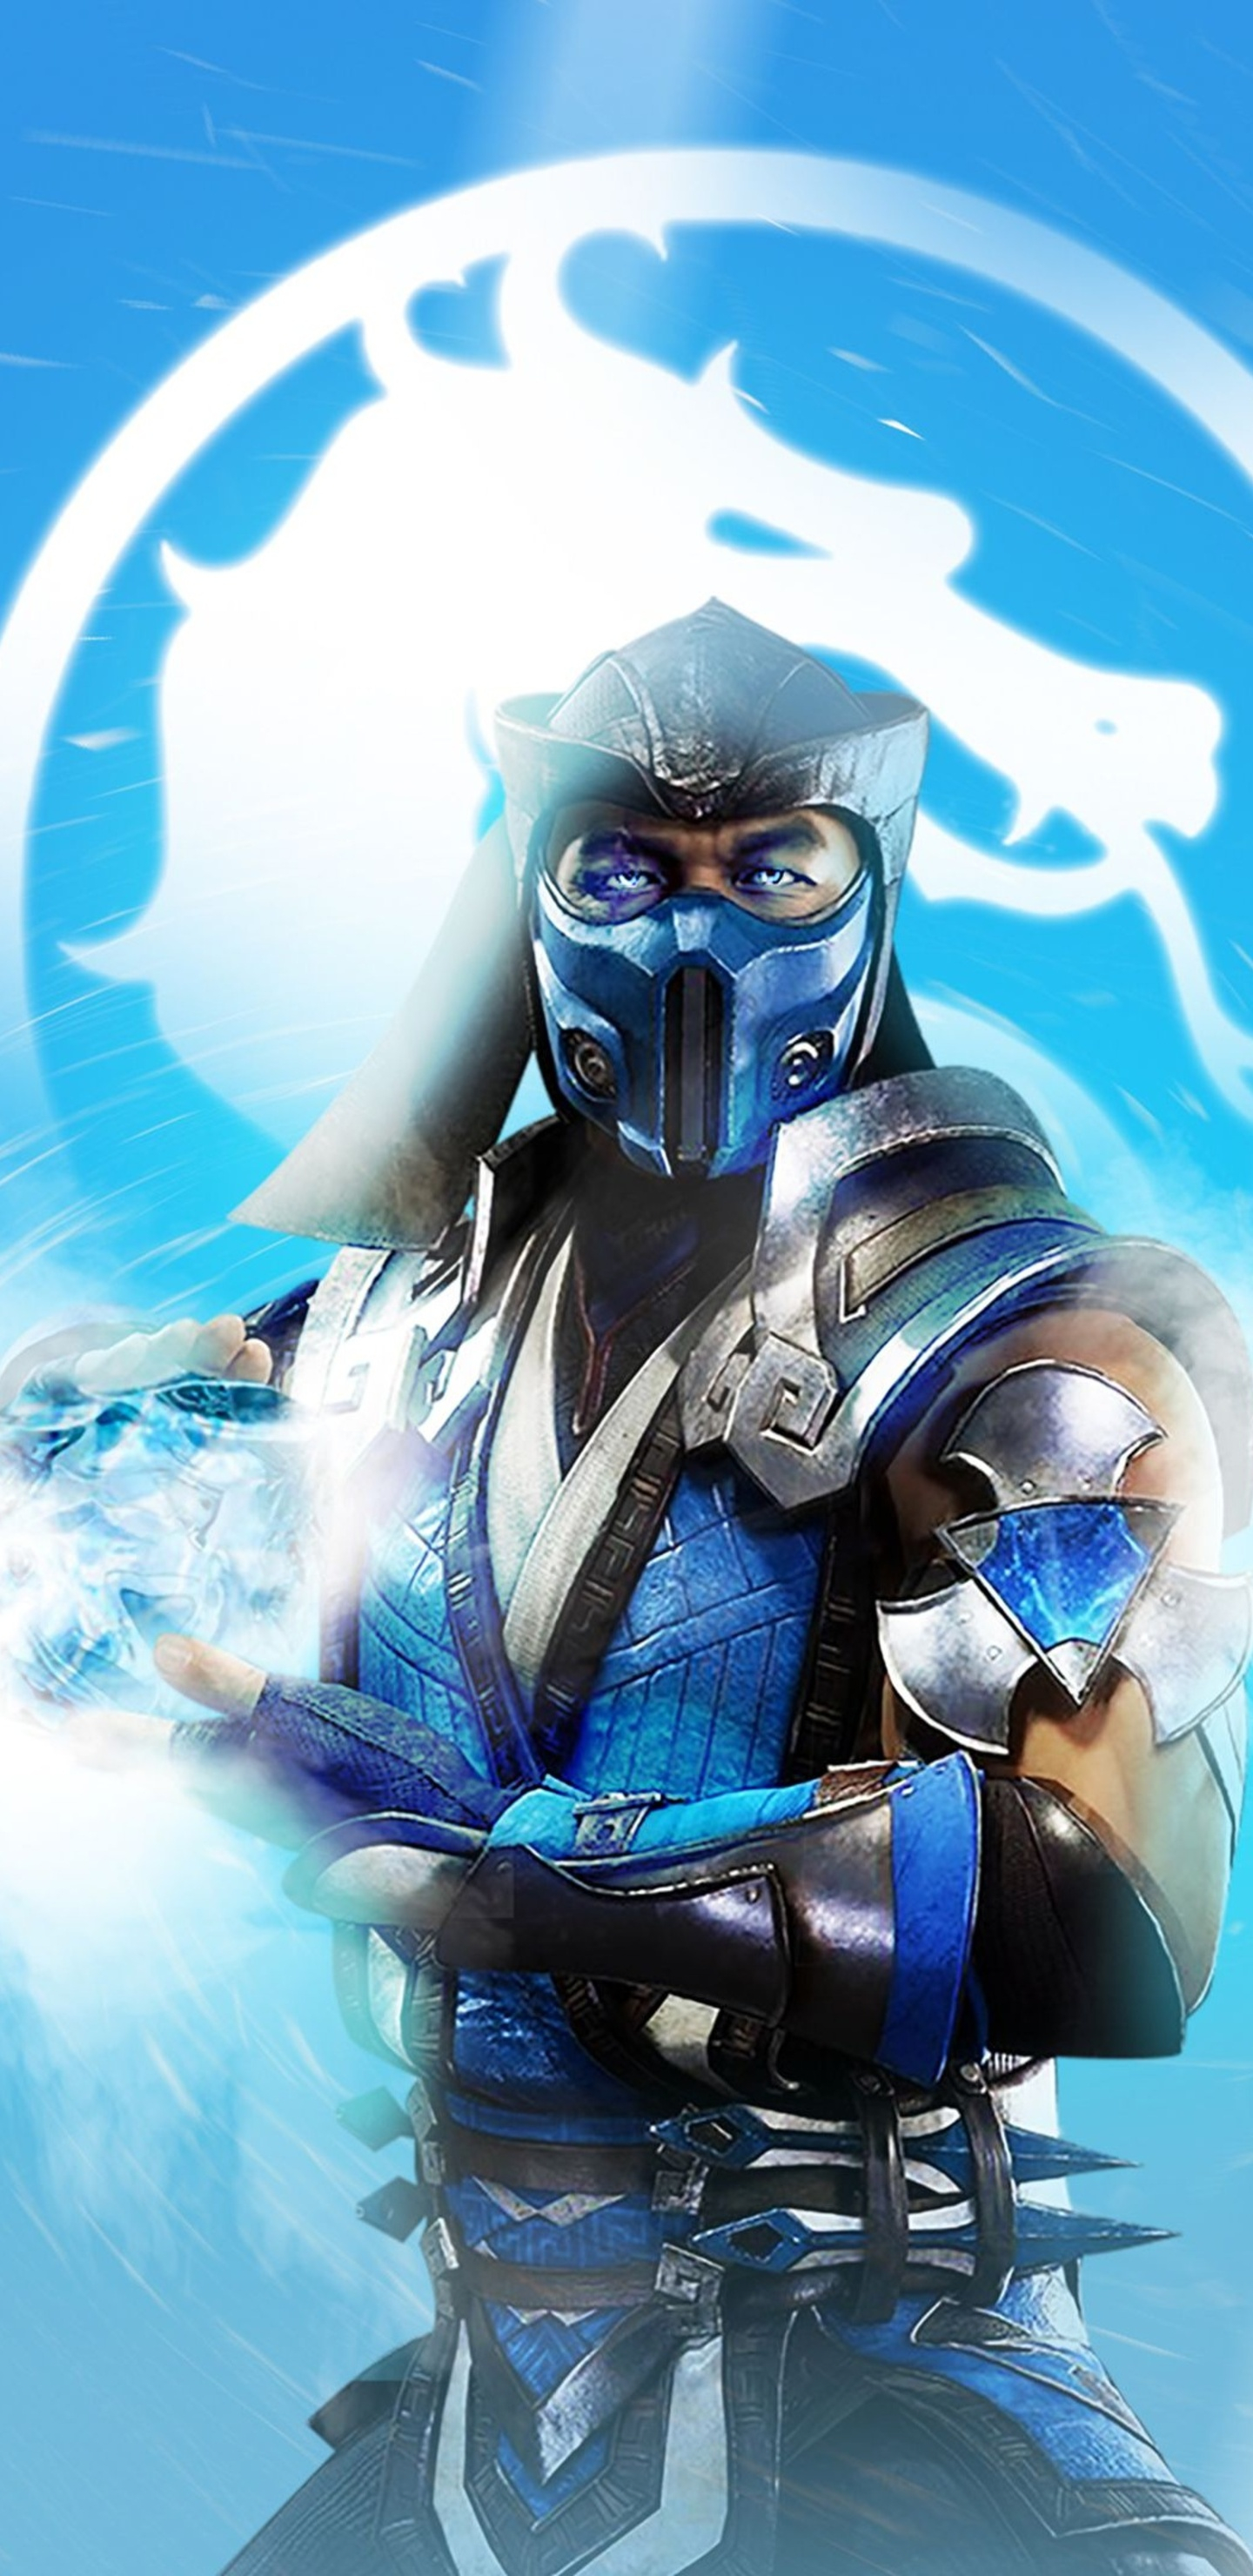 1440x2960 Mortal Kombat Sub Zero 4k 2019 Samsung Galaxy Note 9,8, S9,S8,S8+ QHD HD 4k Wallpapers, Images, Backgrounds, Photos and Pictures